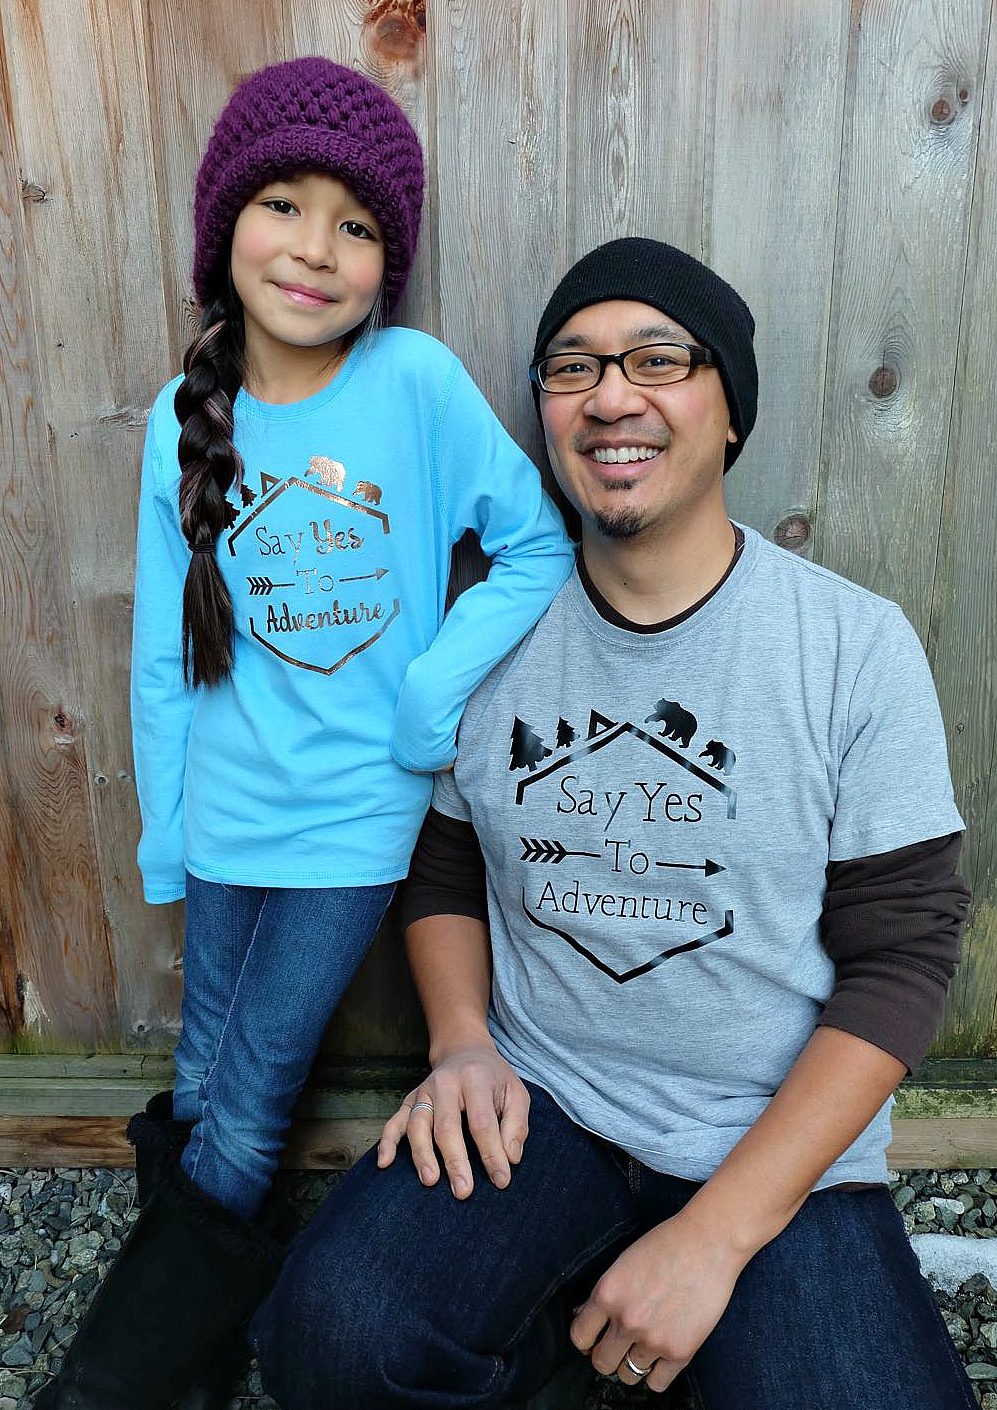 No matter what adventure life throws your way, say yes to adventure with this DIY shirt! Made using the Cricut, this post contains a free cut file and makes an adorable shirt for camping, hiking and other outdoor adventures!